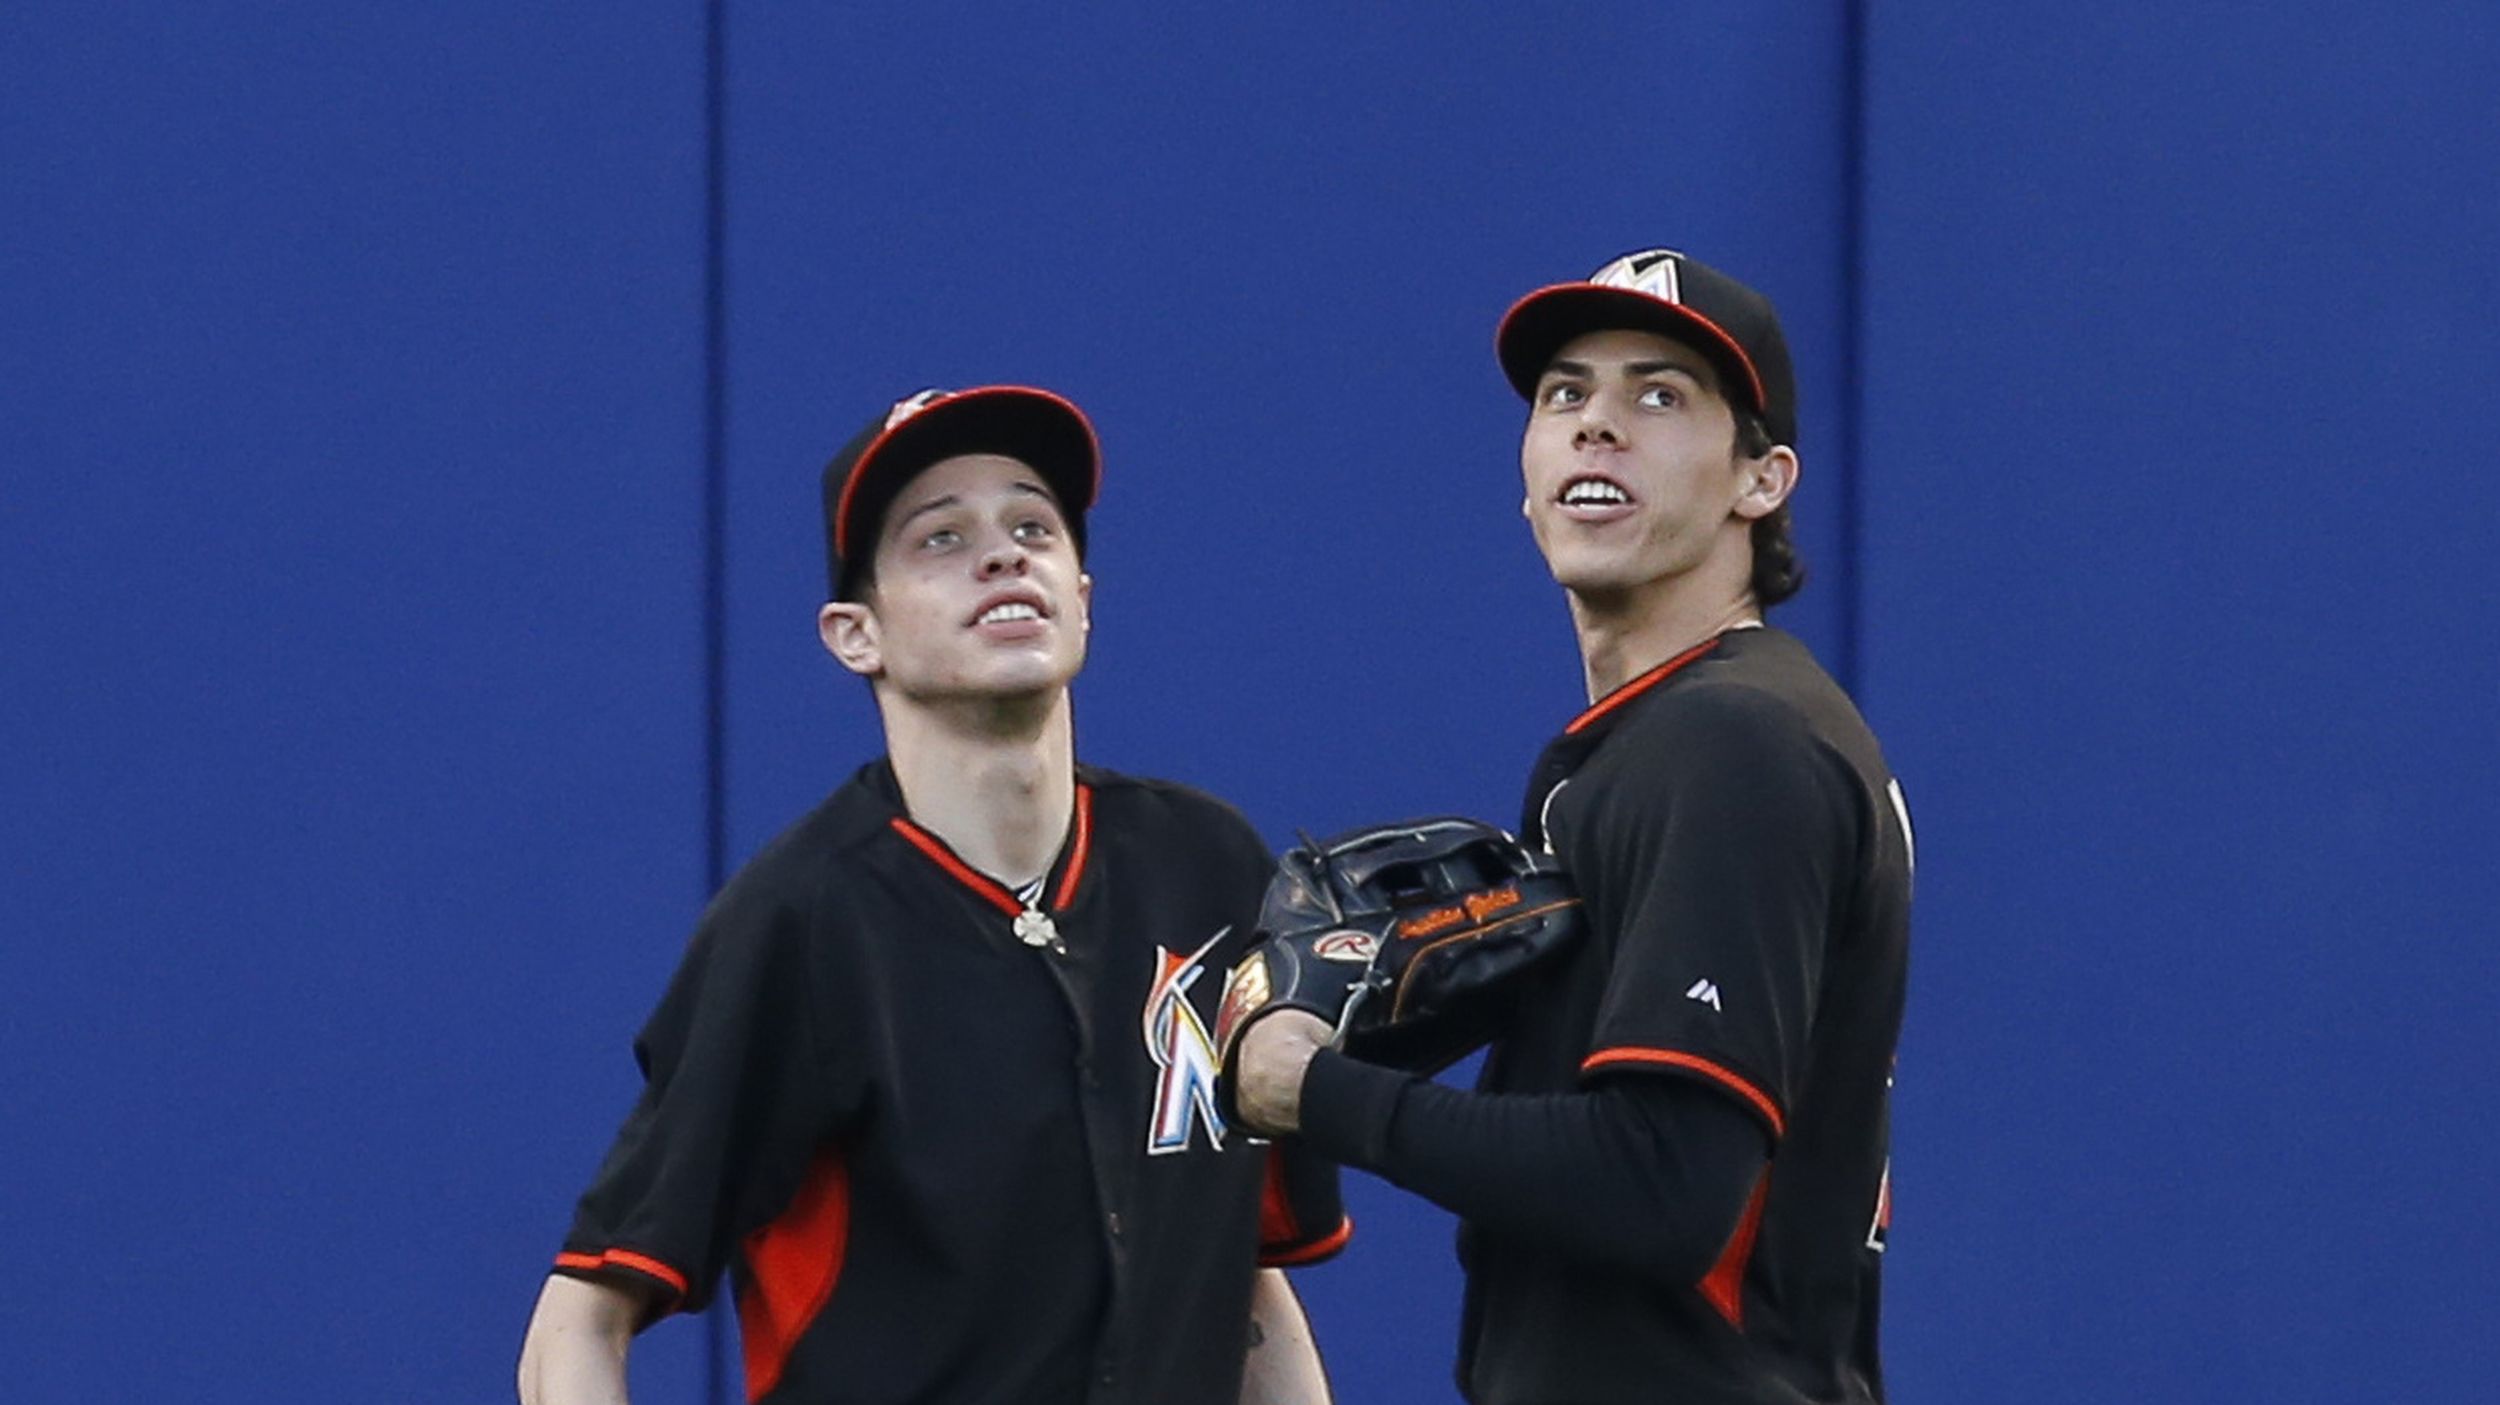 Marlins' Christian Yelich gets surprise visit from SNL doppelganger